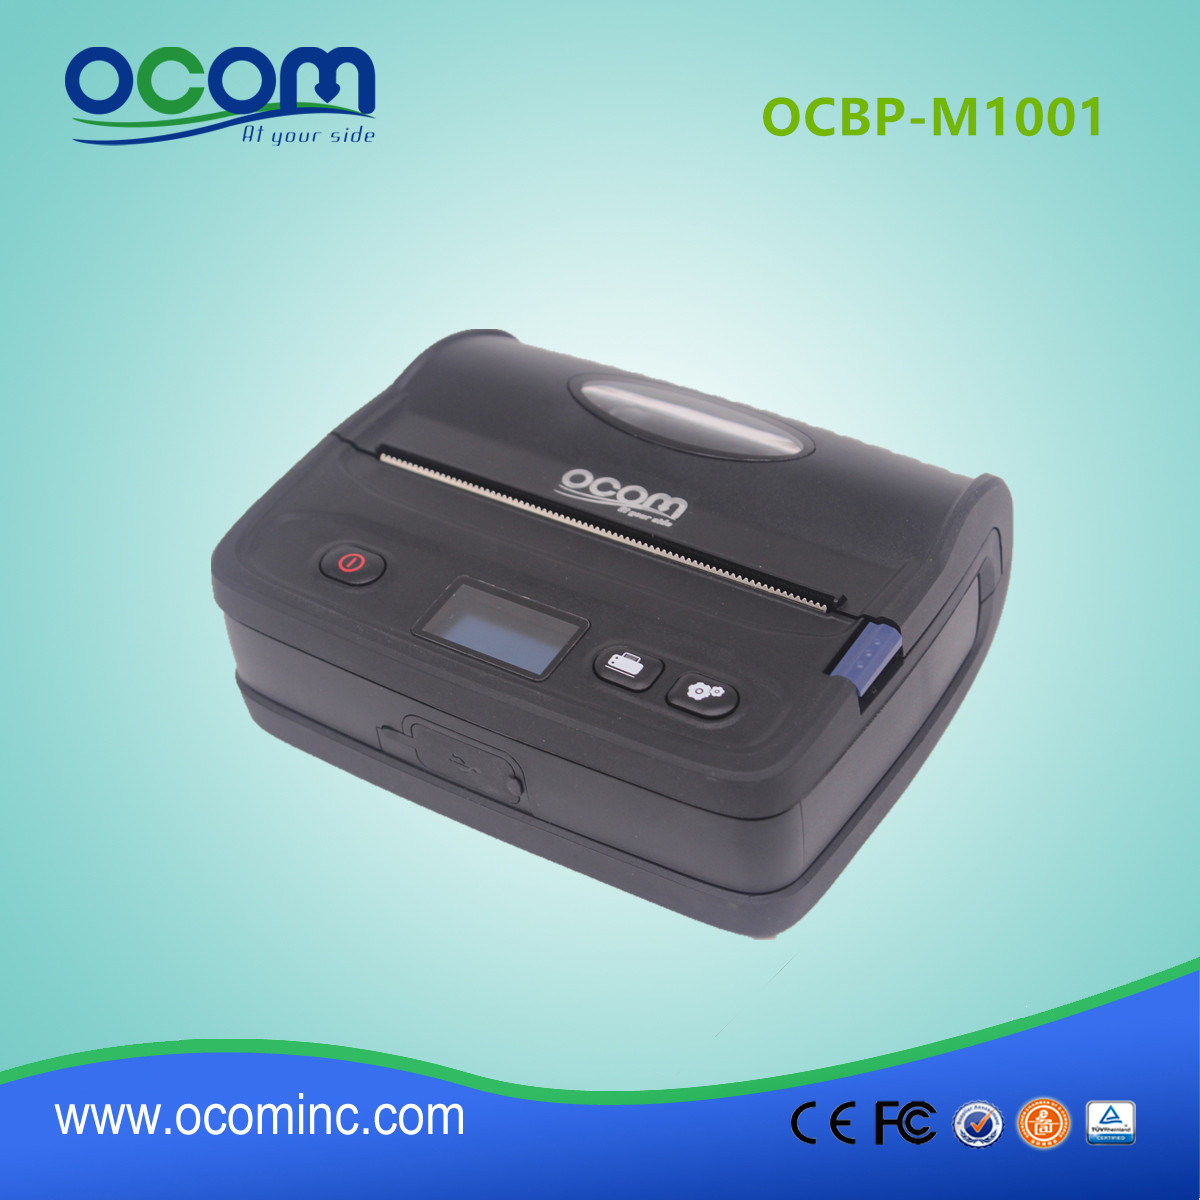 OCBP-M1001 4inches Bluetooth Mobile Direct Thermal Label Printer